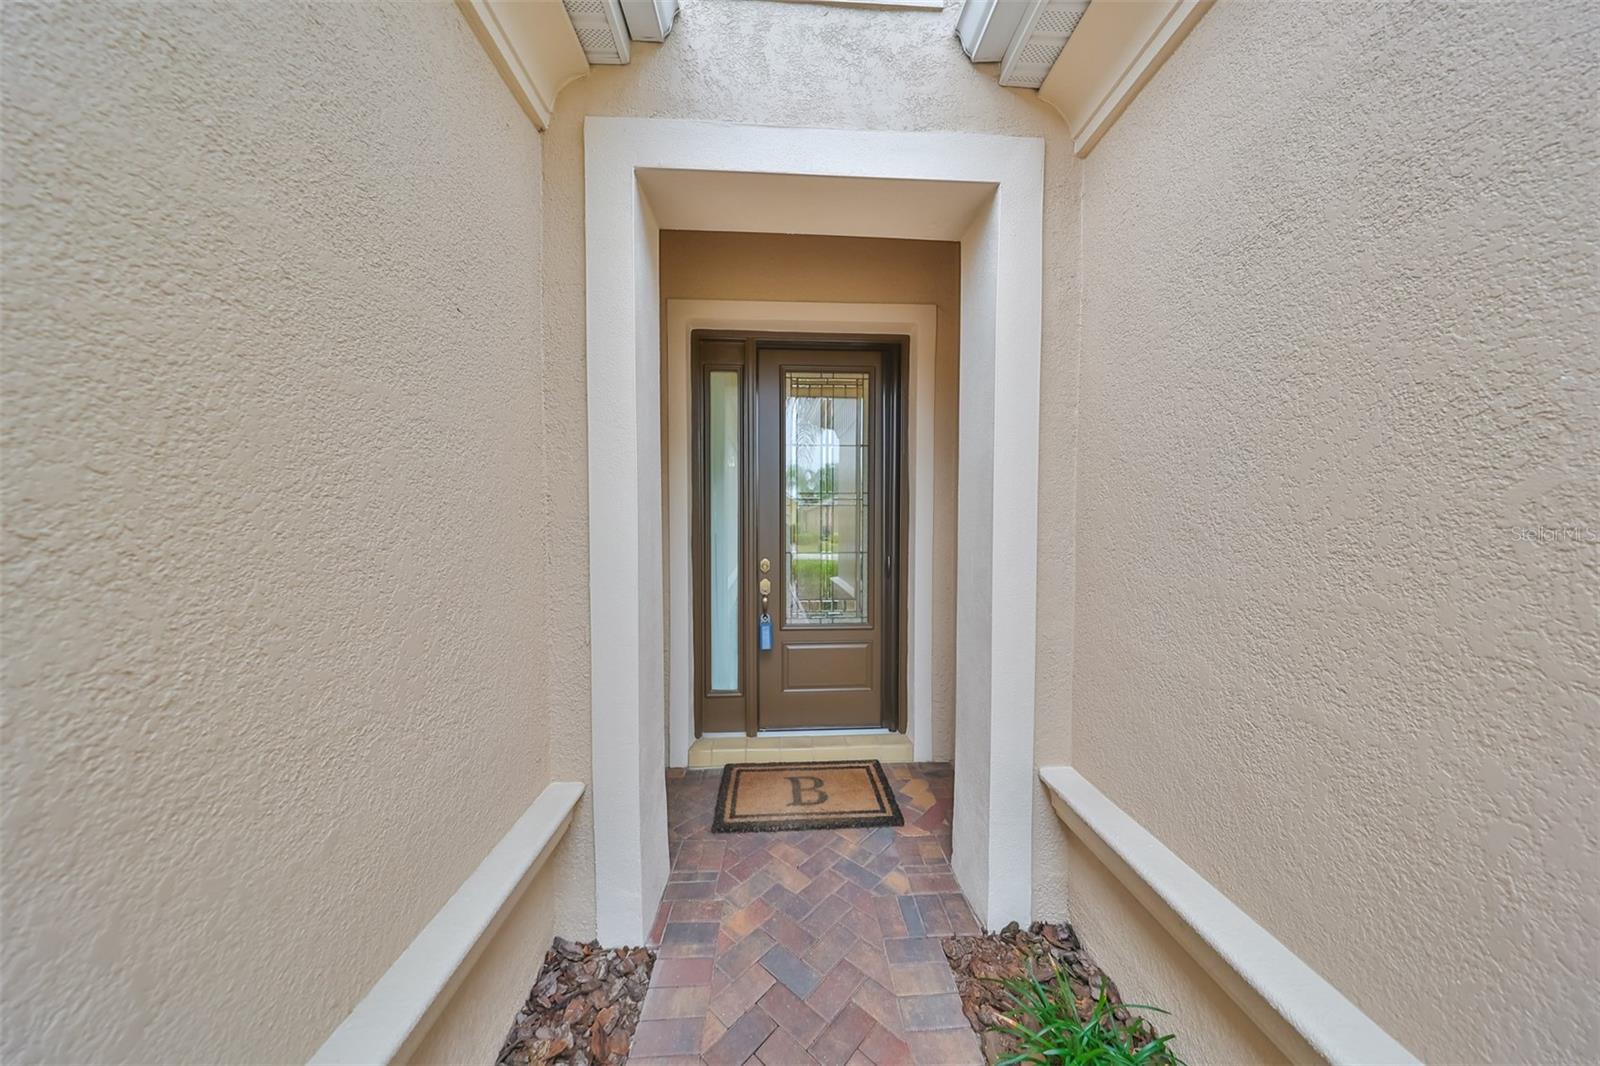 The lead-glass door entrance to this luxury home is beautifully manicured and well maintained. Walking to the front door or up and down the street, you immediately feel the "pride of ownership" in this community.